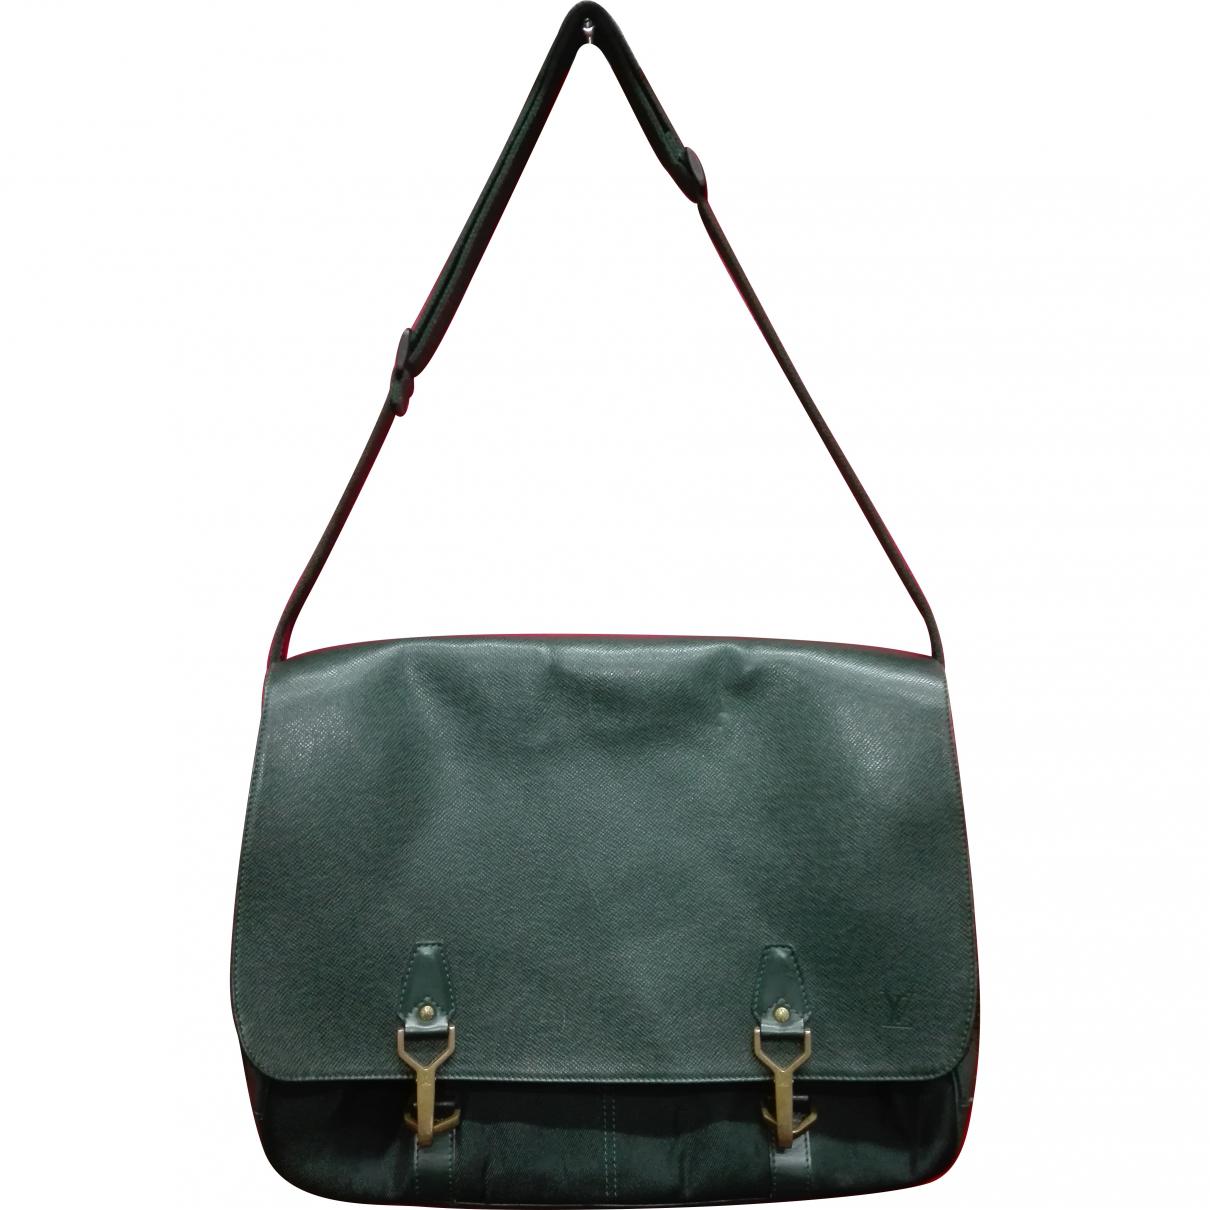 Lyst - Louis Vuitton Pre-owned Vintage Green Leather Handbags in Green